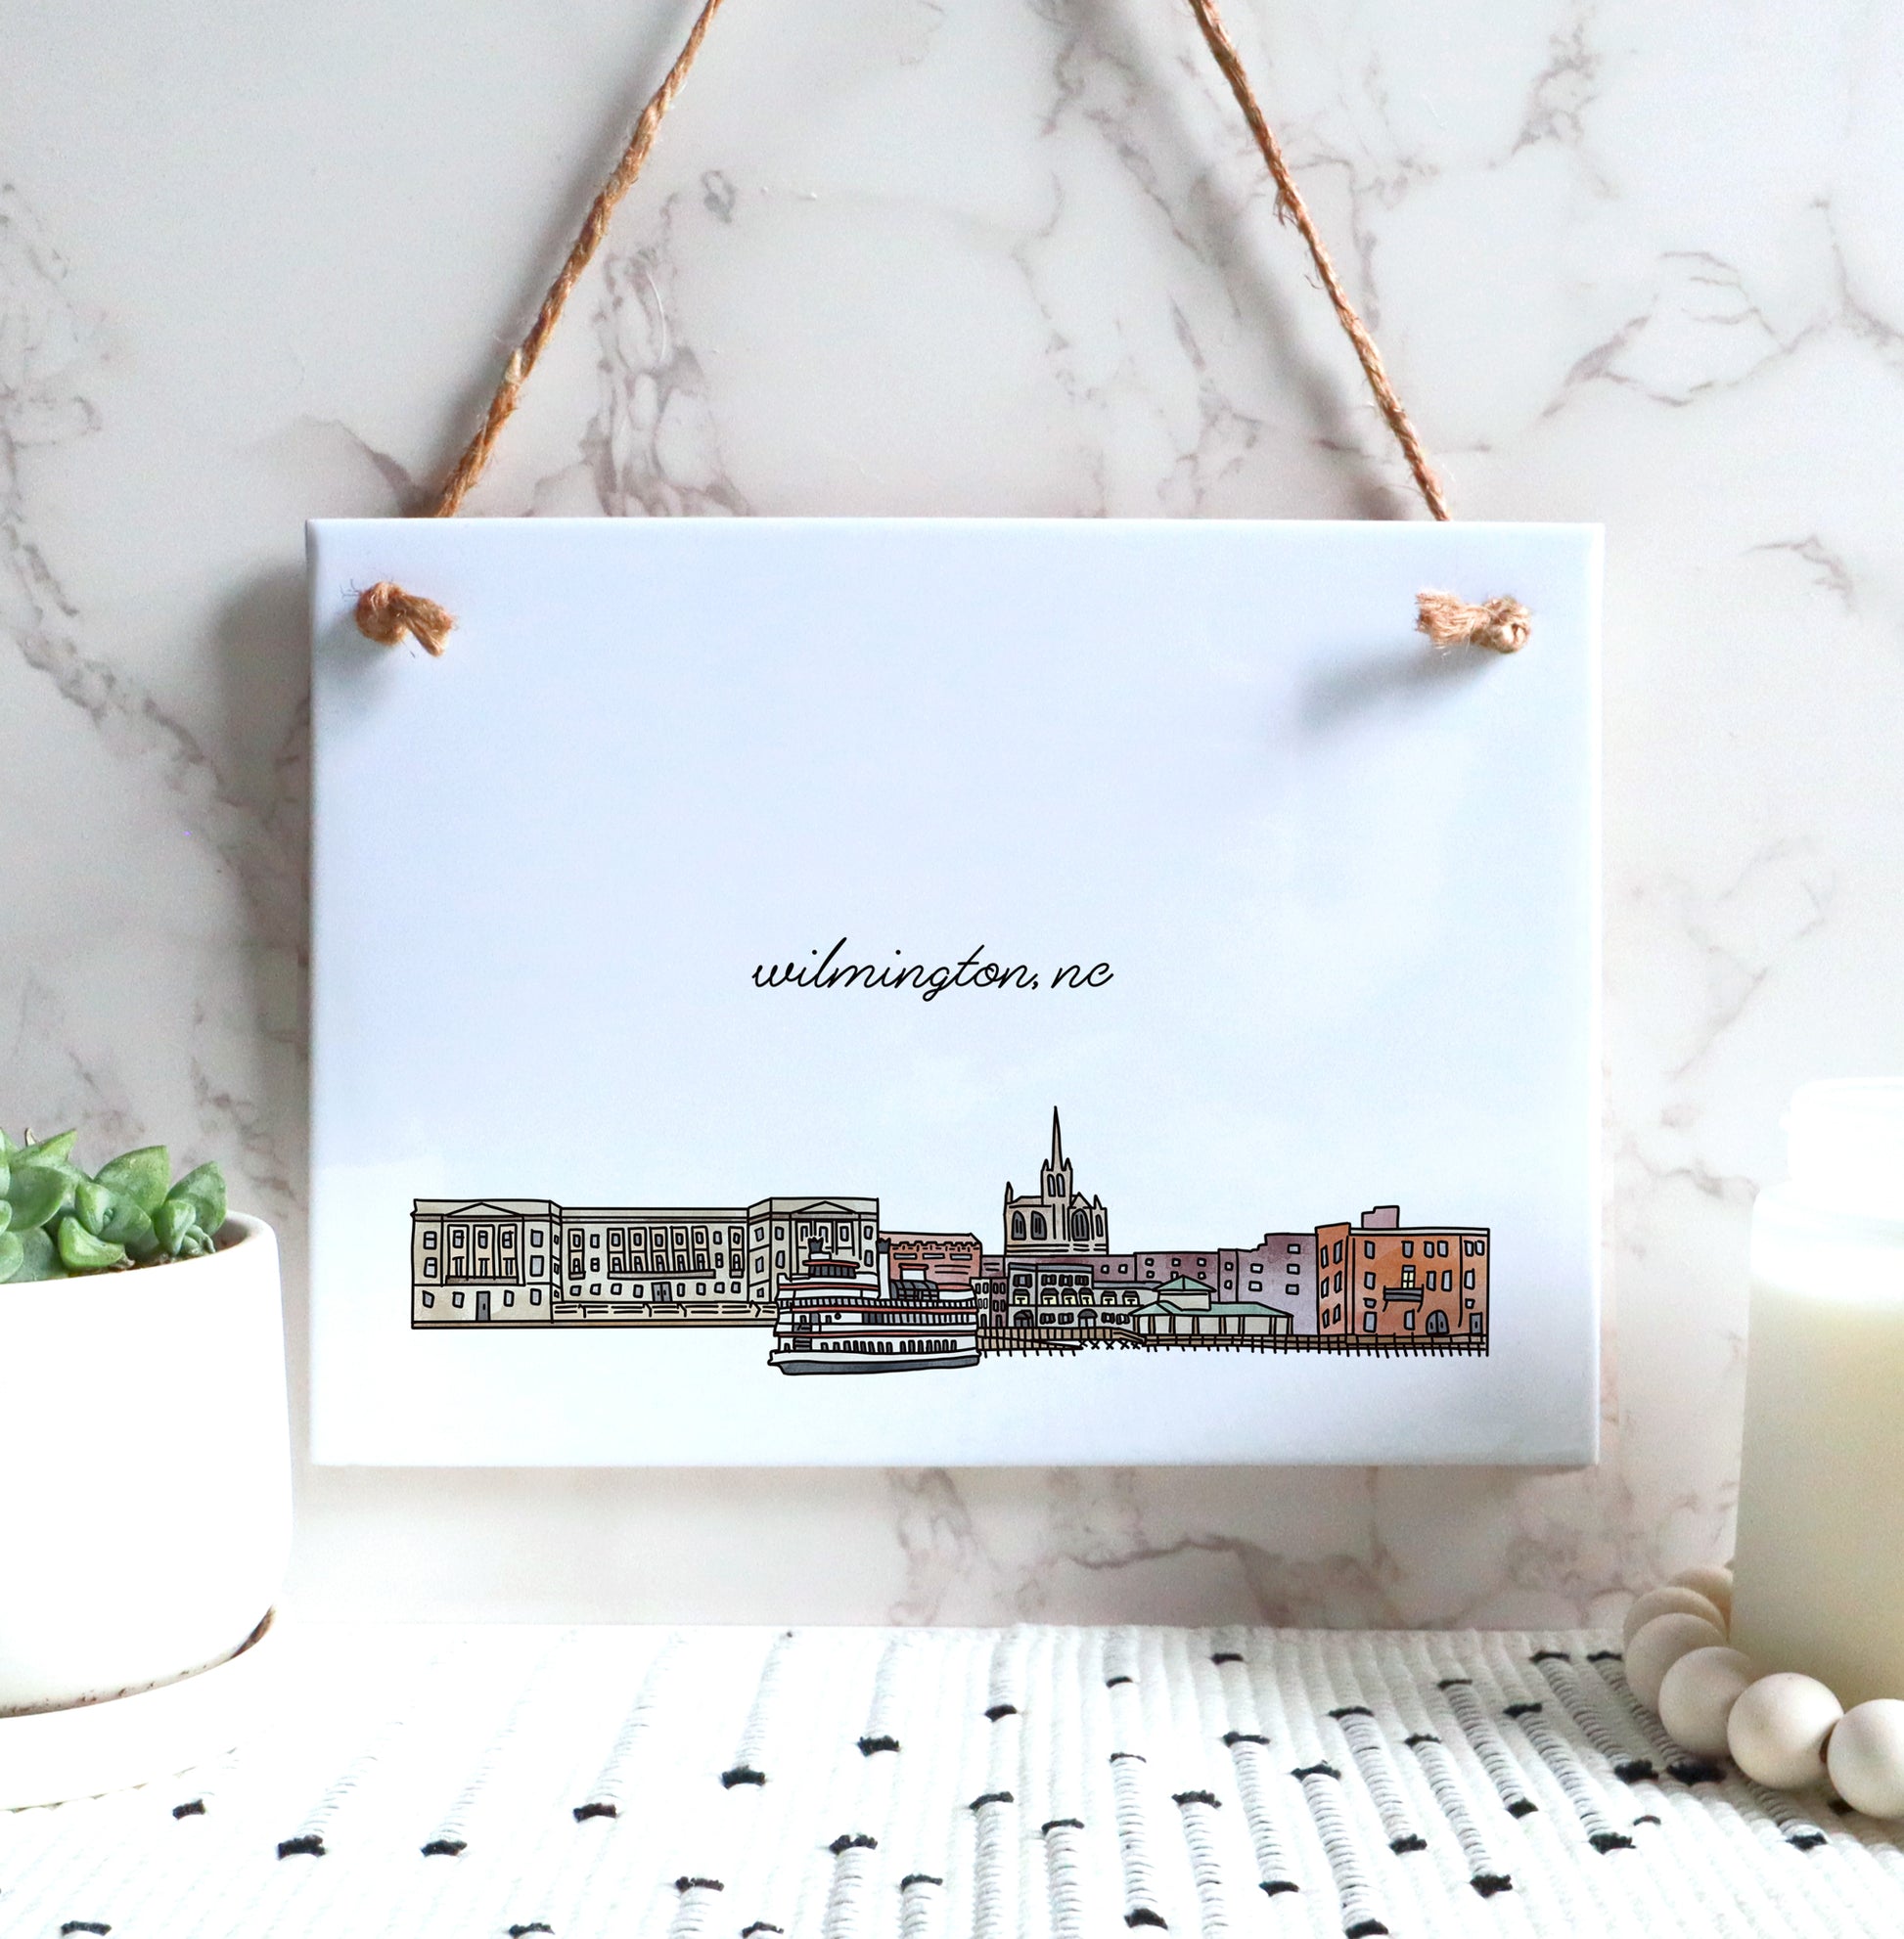 A Wilmington NC souvenir of a drawing of the city skyline on a rectangle tile sign, hanging on a wall - in the color natural